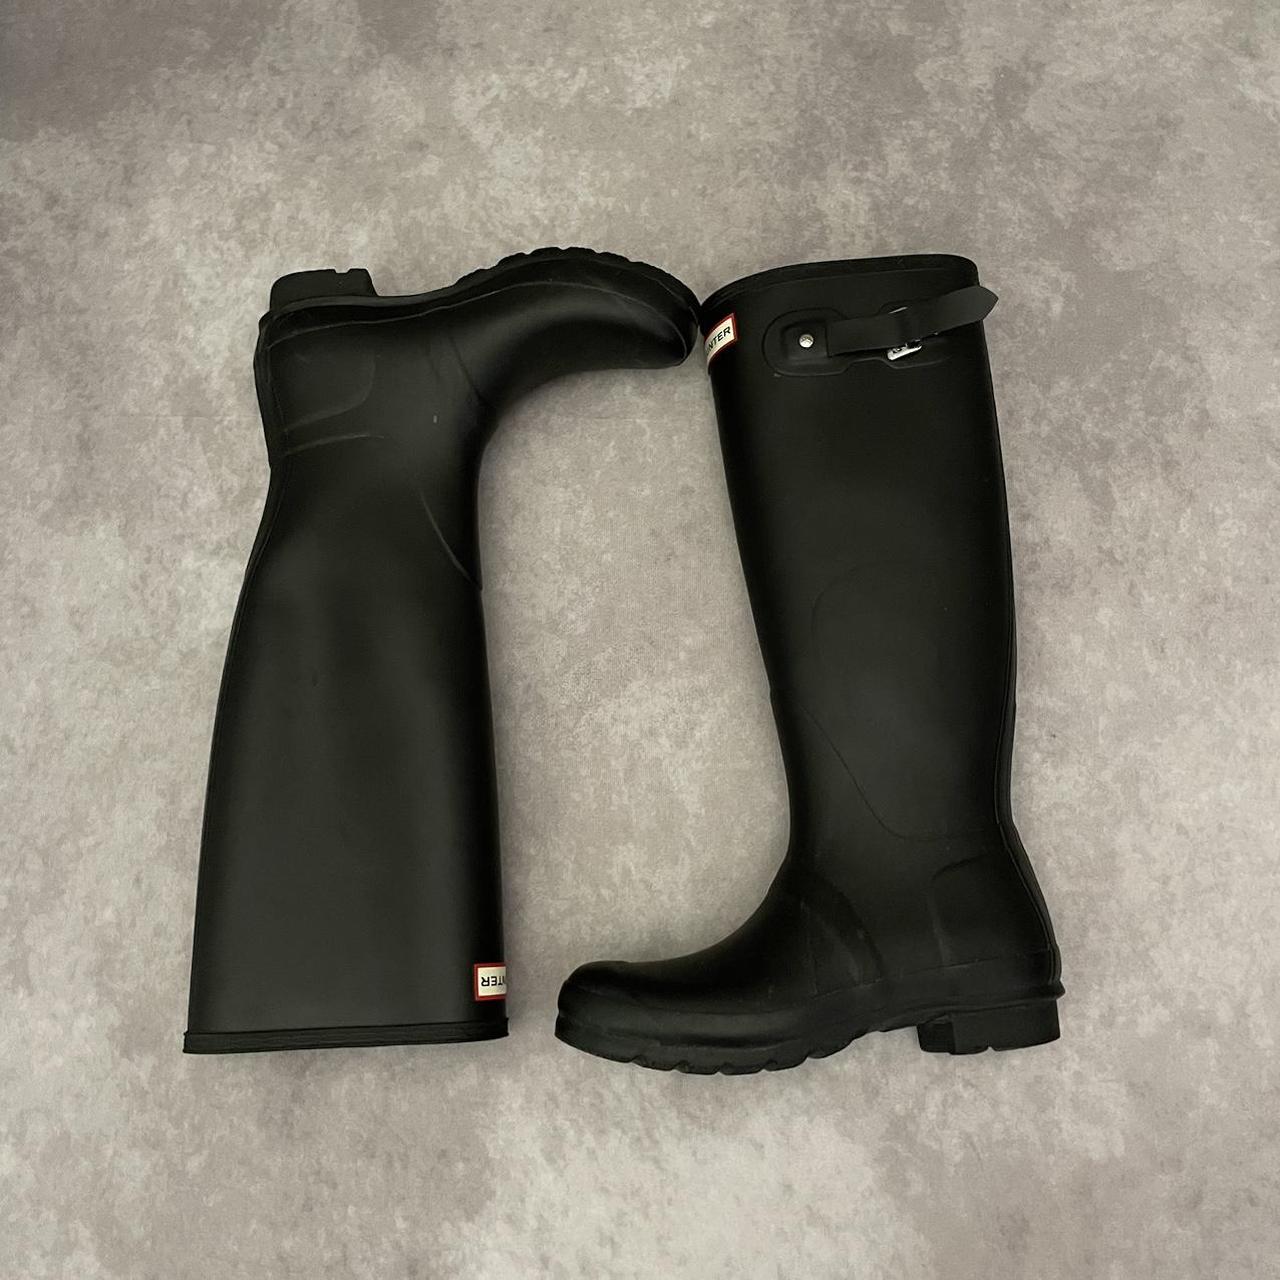 Product Image 1 - HUNTER BOOTS SZ 8 
-
Ask